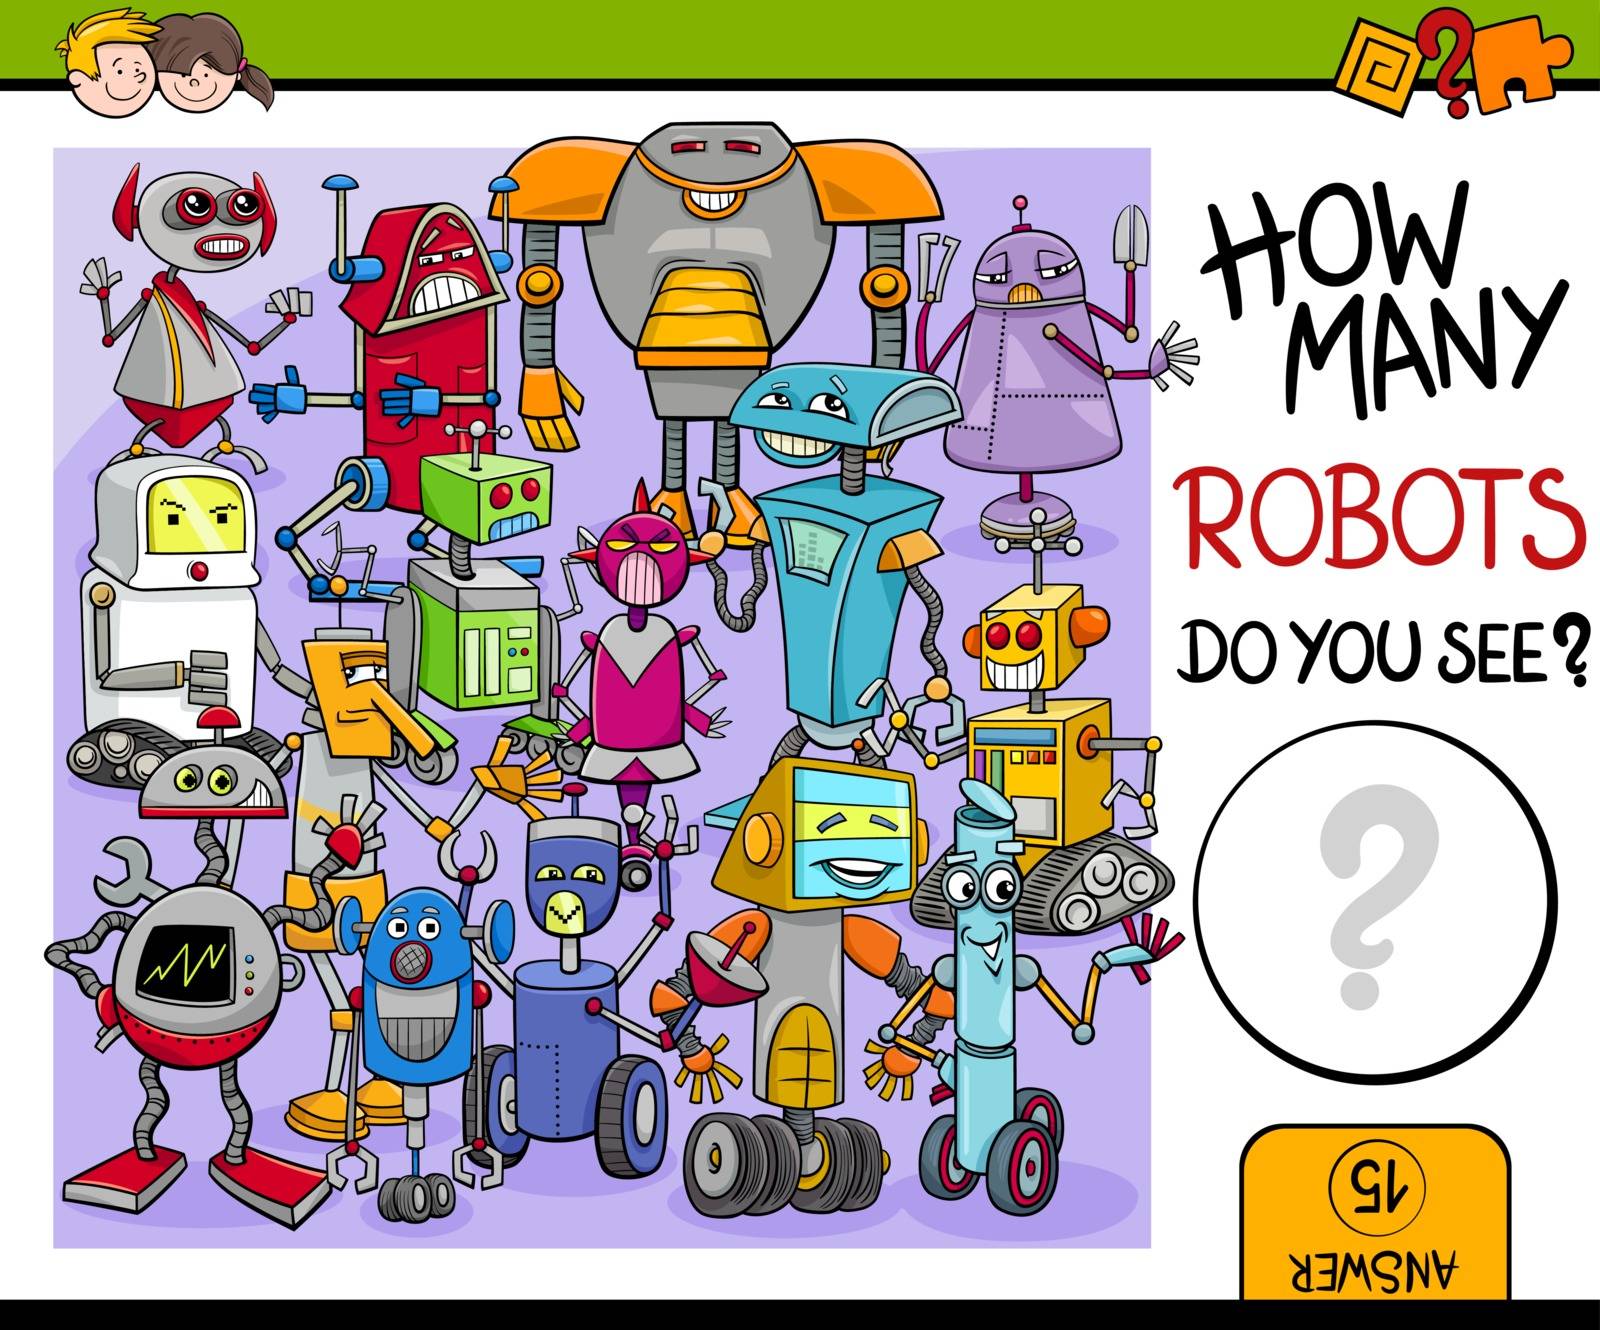 Cartoon Illustration of Educational Counting or Calculating Task for Preschool Children with Robot Characters